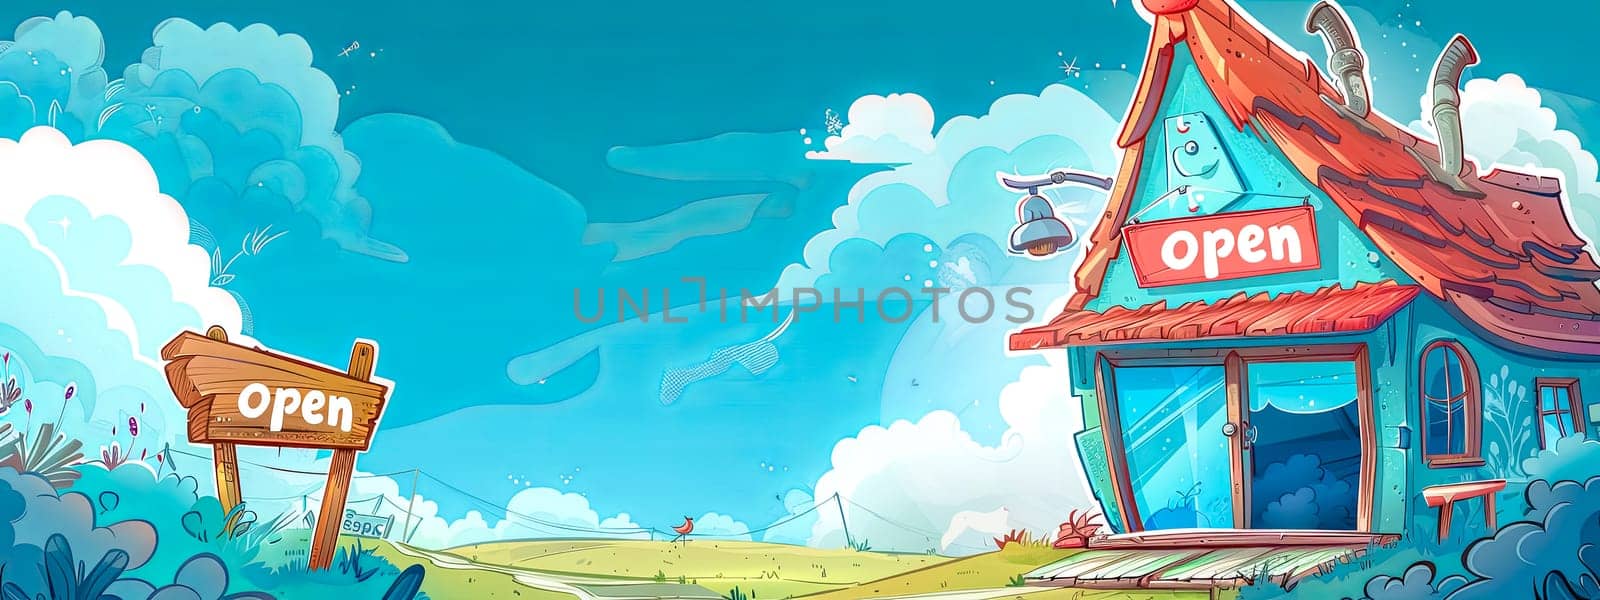 Vibrant cartoon illustration of a whimsical cafe with open signs on a sunny day